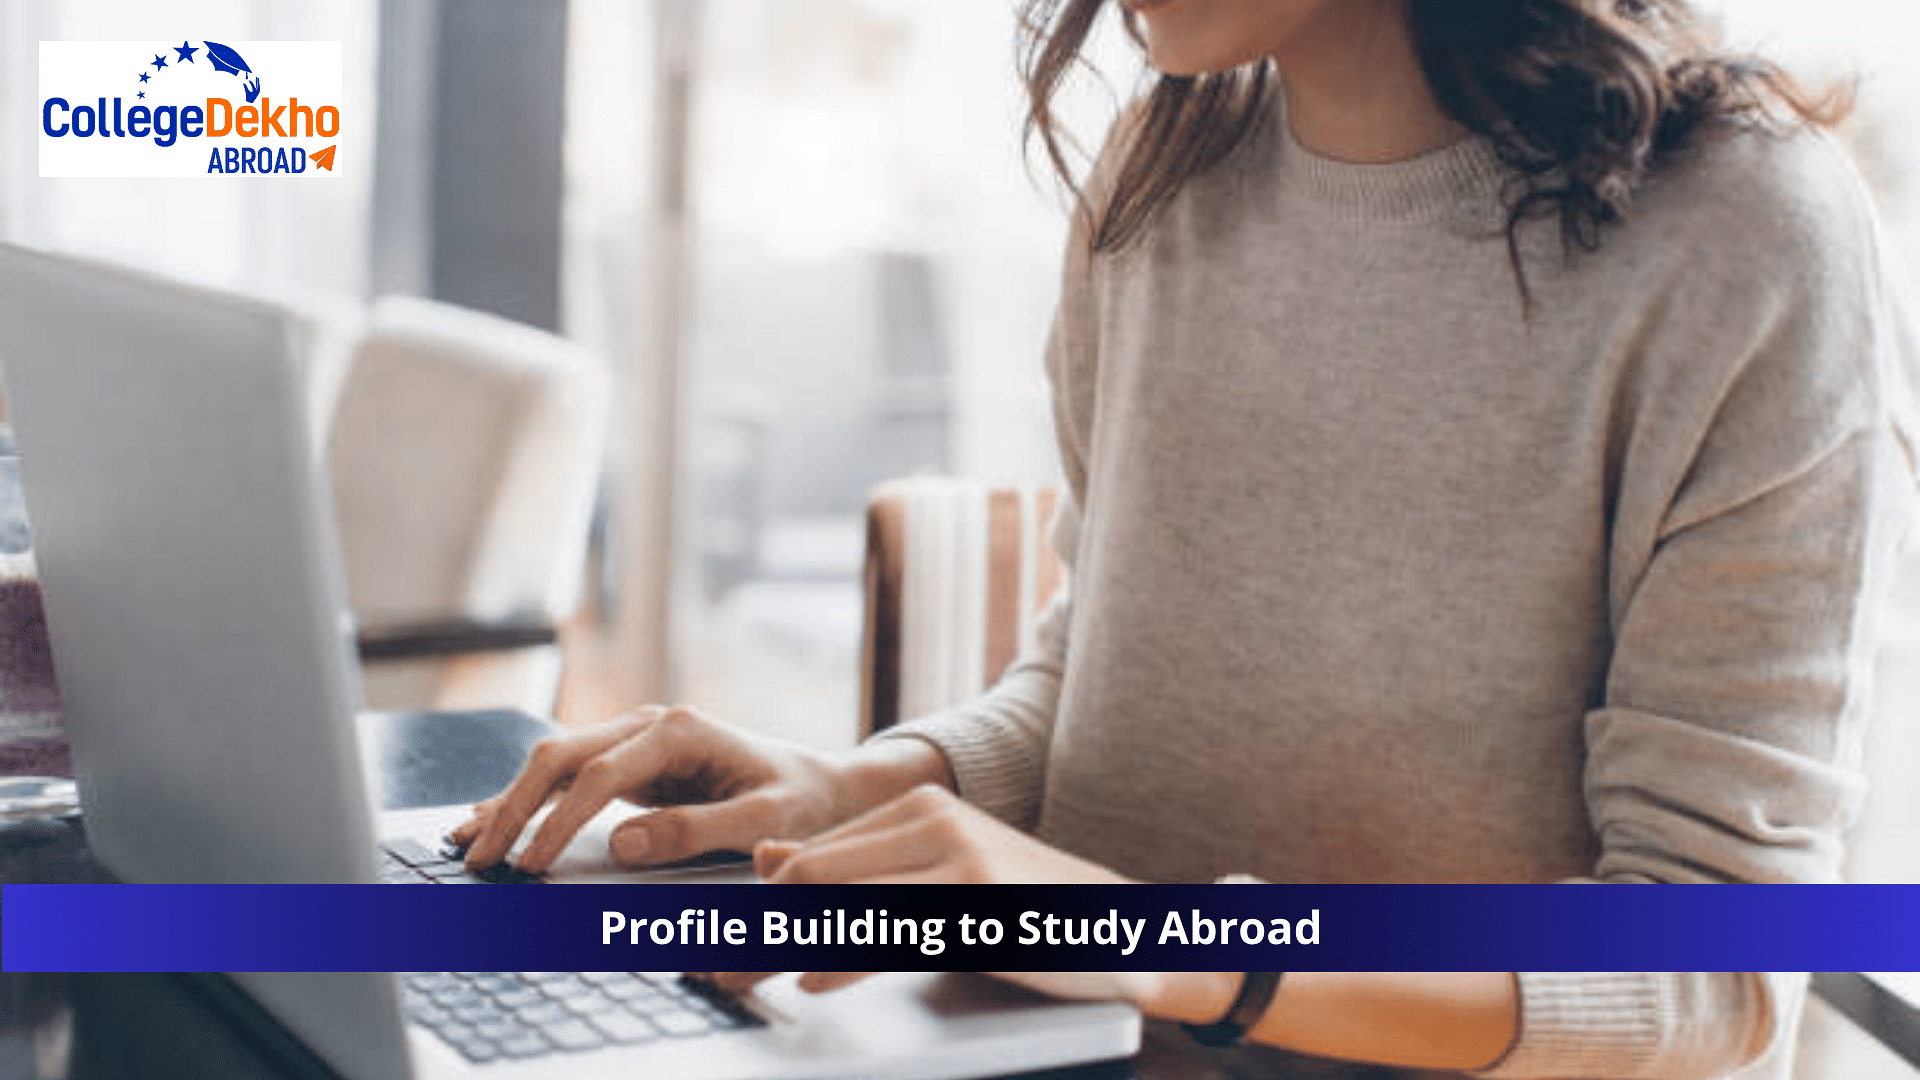 Profile Building to Study Abroad